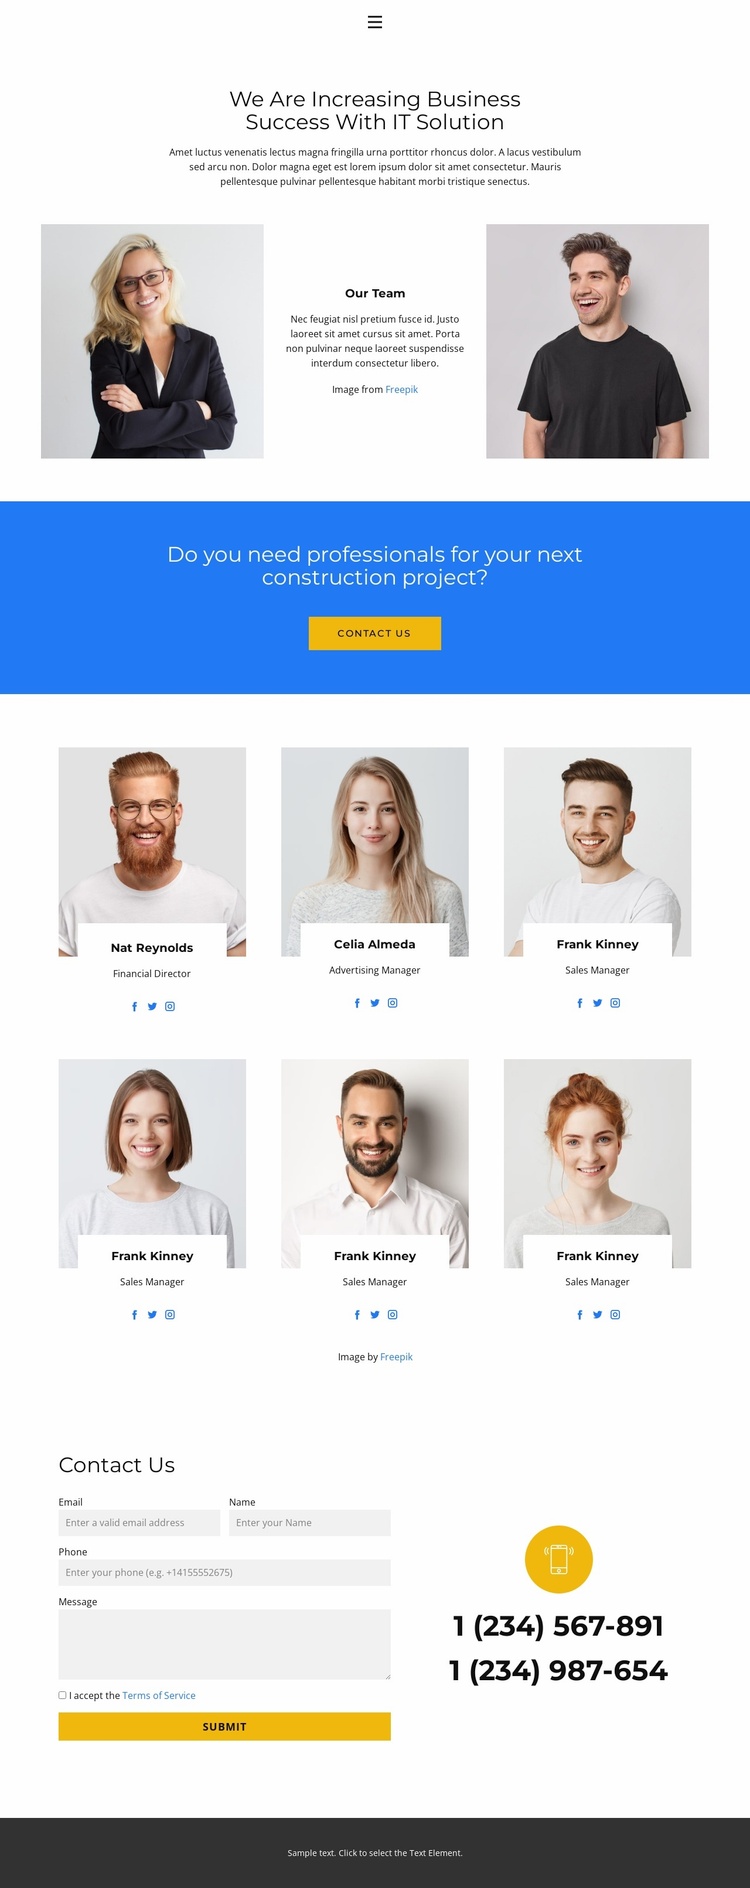 The best of the team Landing Page